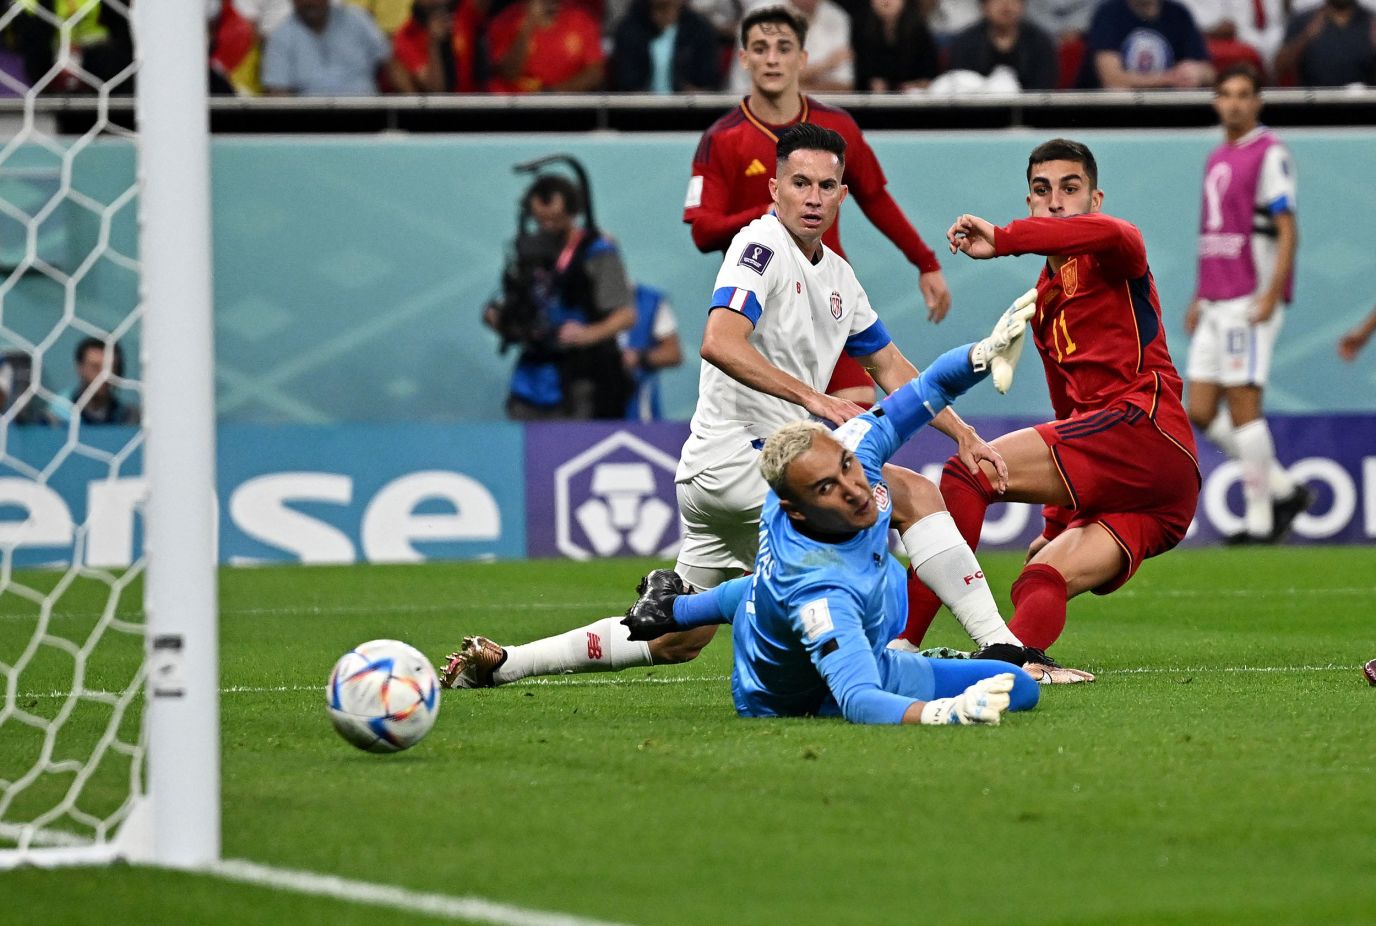 Spain's Ferran Torres, right, shoots past Costa Rican goalkeeper Keylor Navas to give his team a 4-0 lead in their opening match on Wednesday. Spain went on to win 7-0.